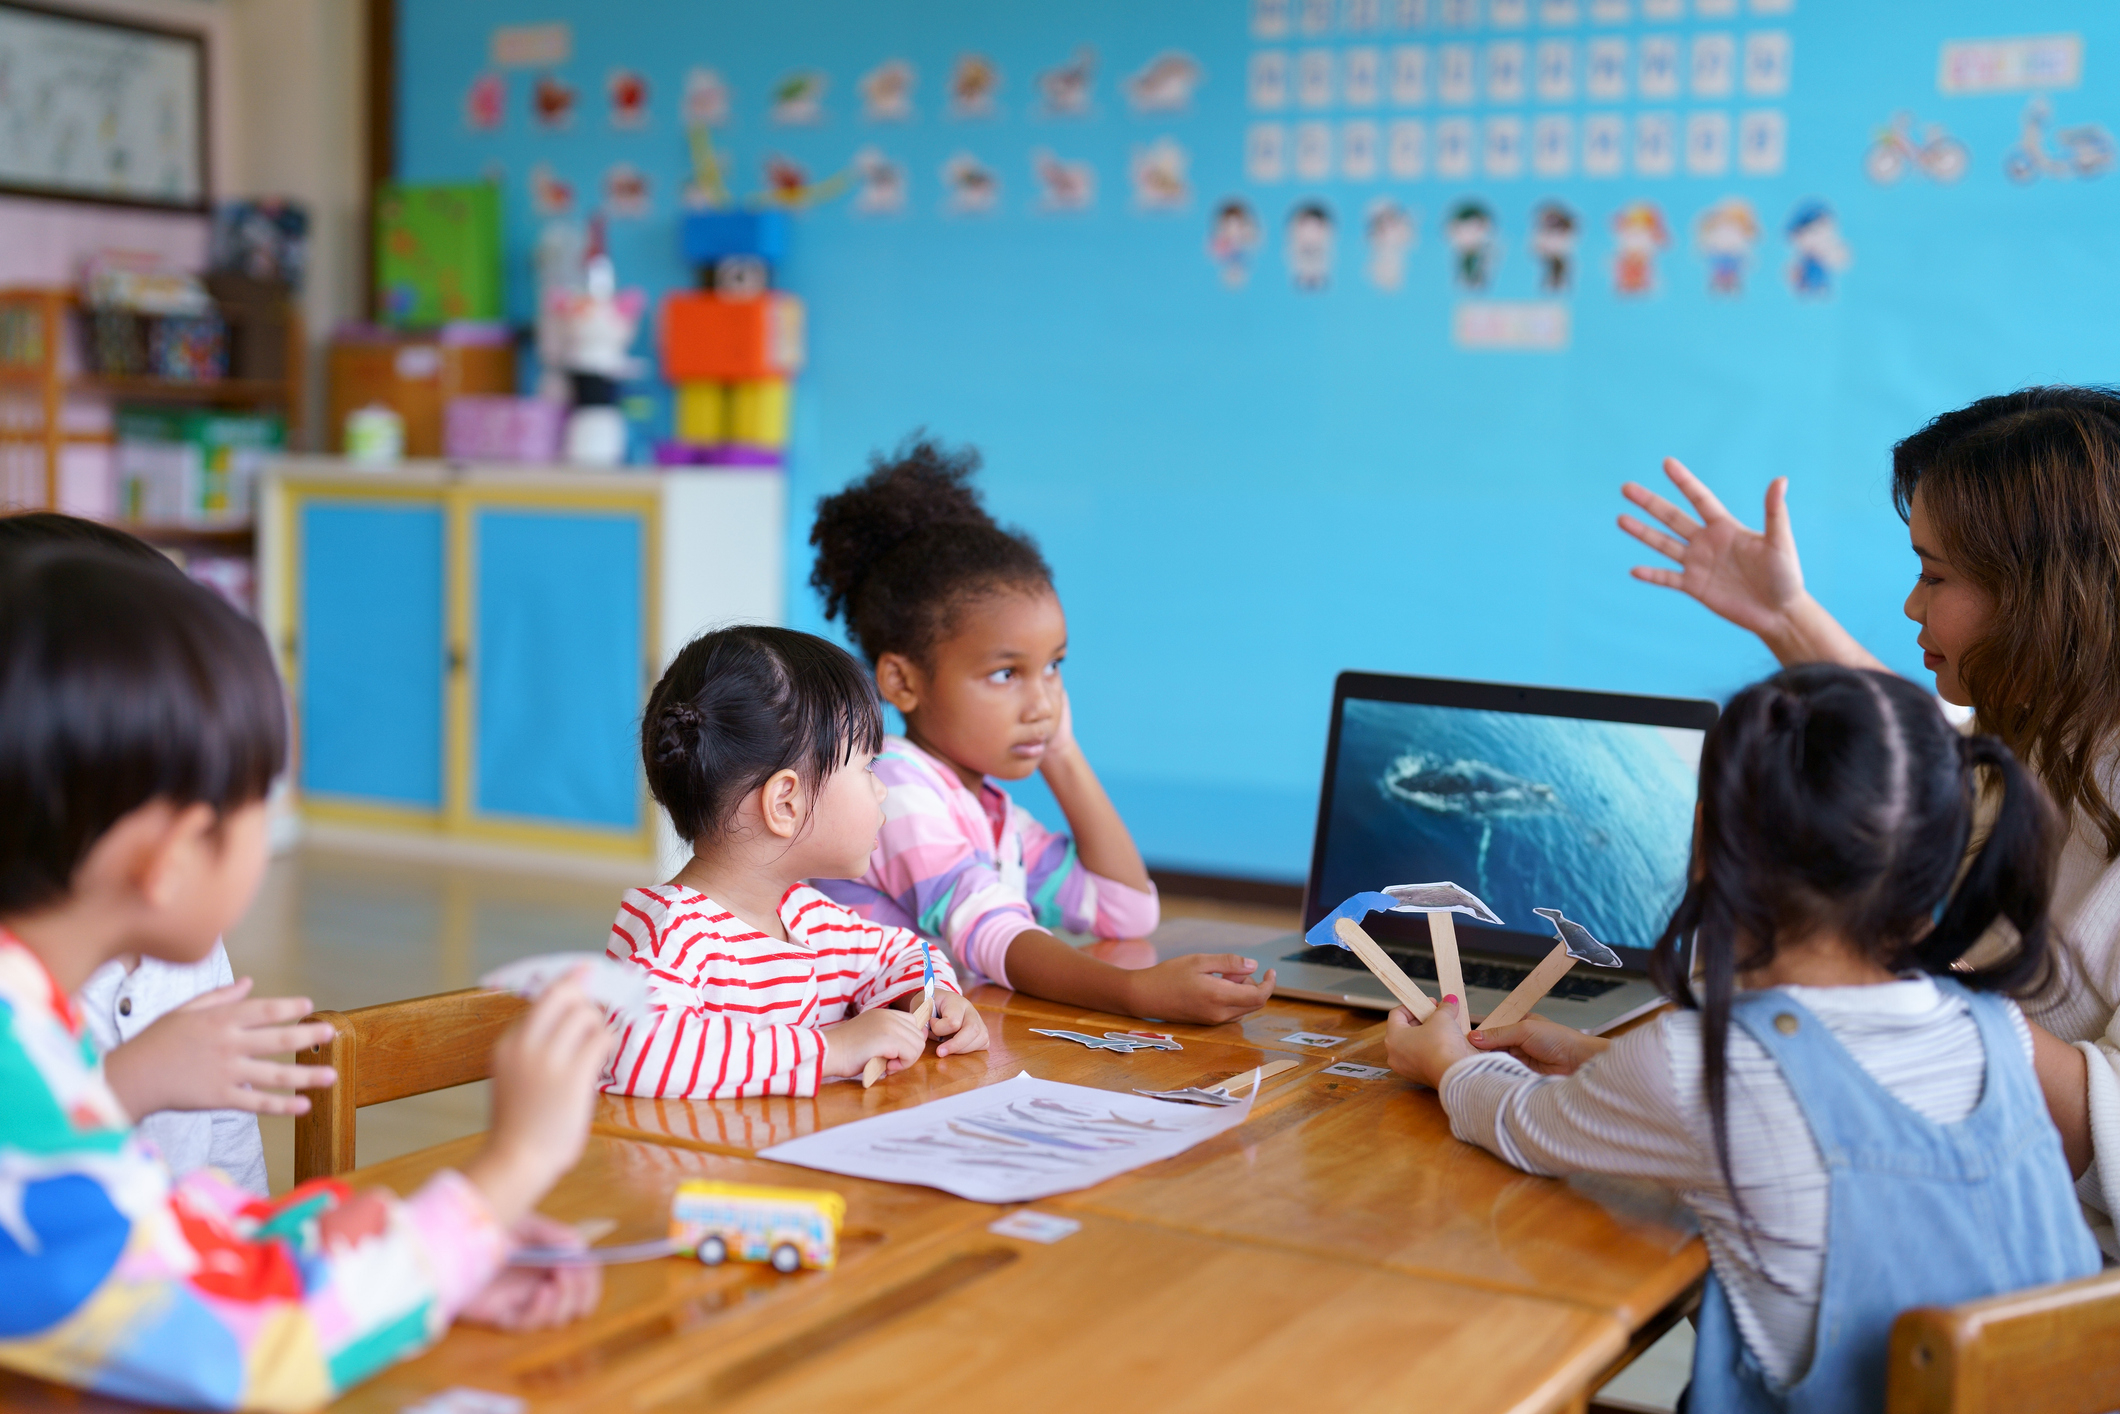 Teacher interacting with young students at a classroom table with a laptop and educational materials